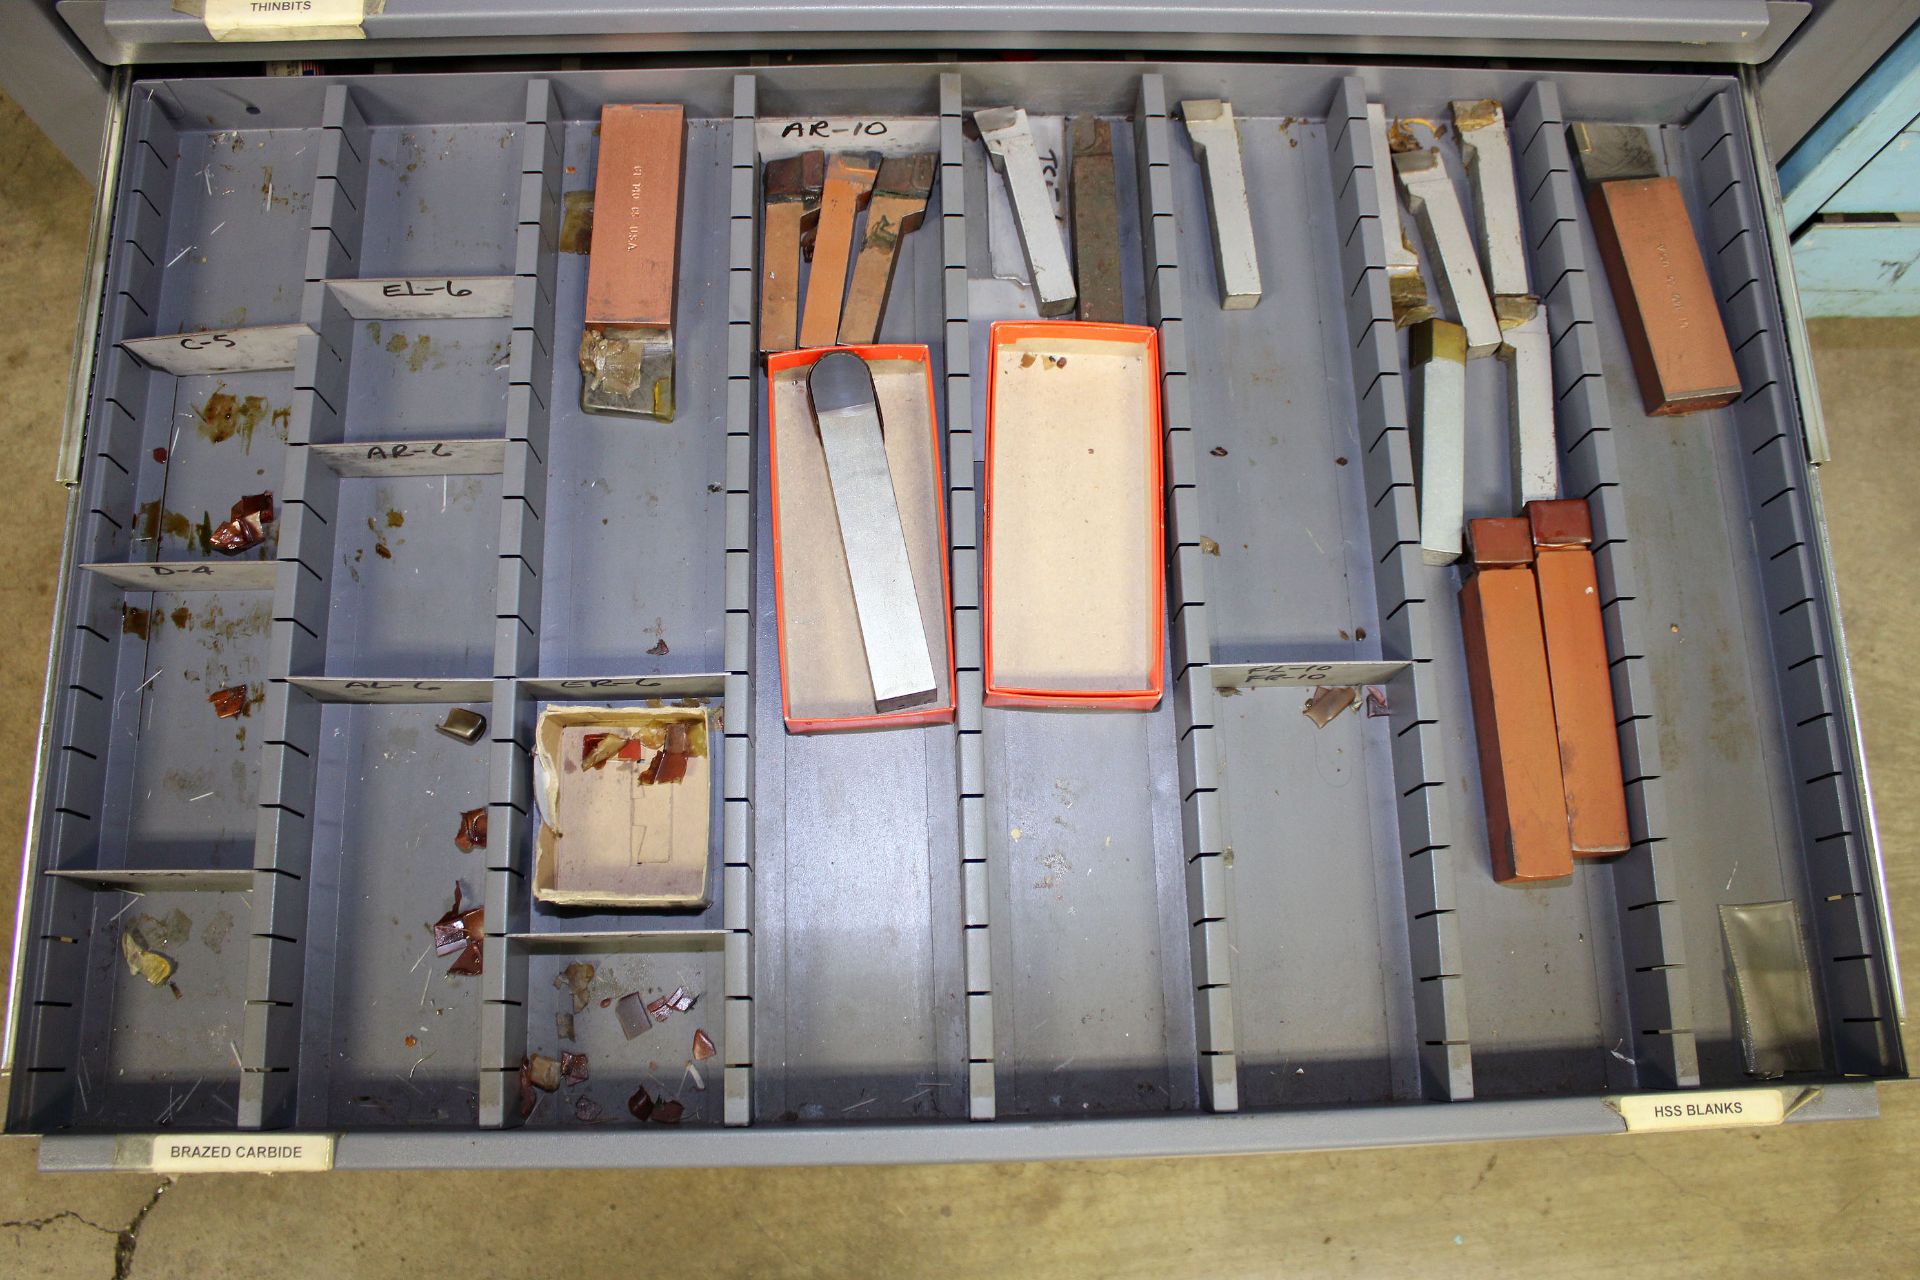 CABINET, HUOT, 15 DRAWER, 19" X 34" X 37" HEIGHT, WITH CONTENTS, CENTER DRILLS , JACOBES CHUCK KEYS, - Image 9 of 12